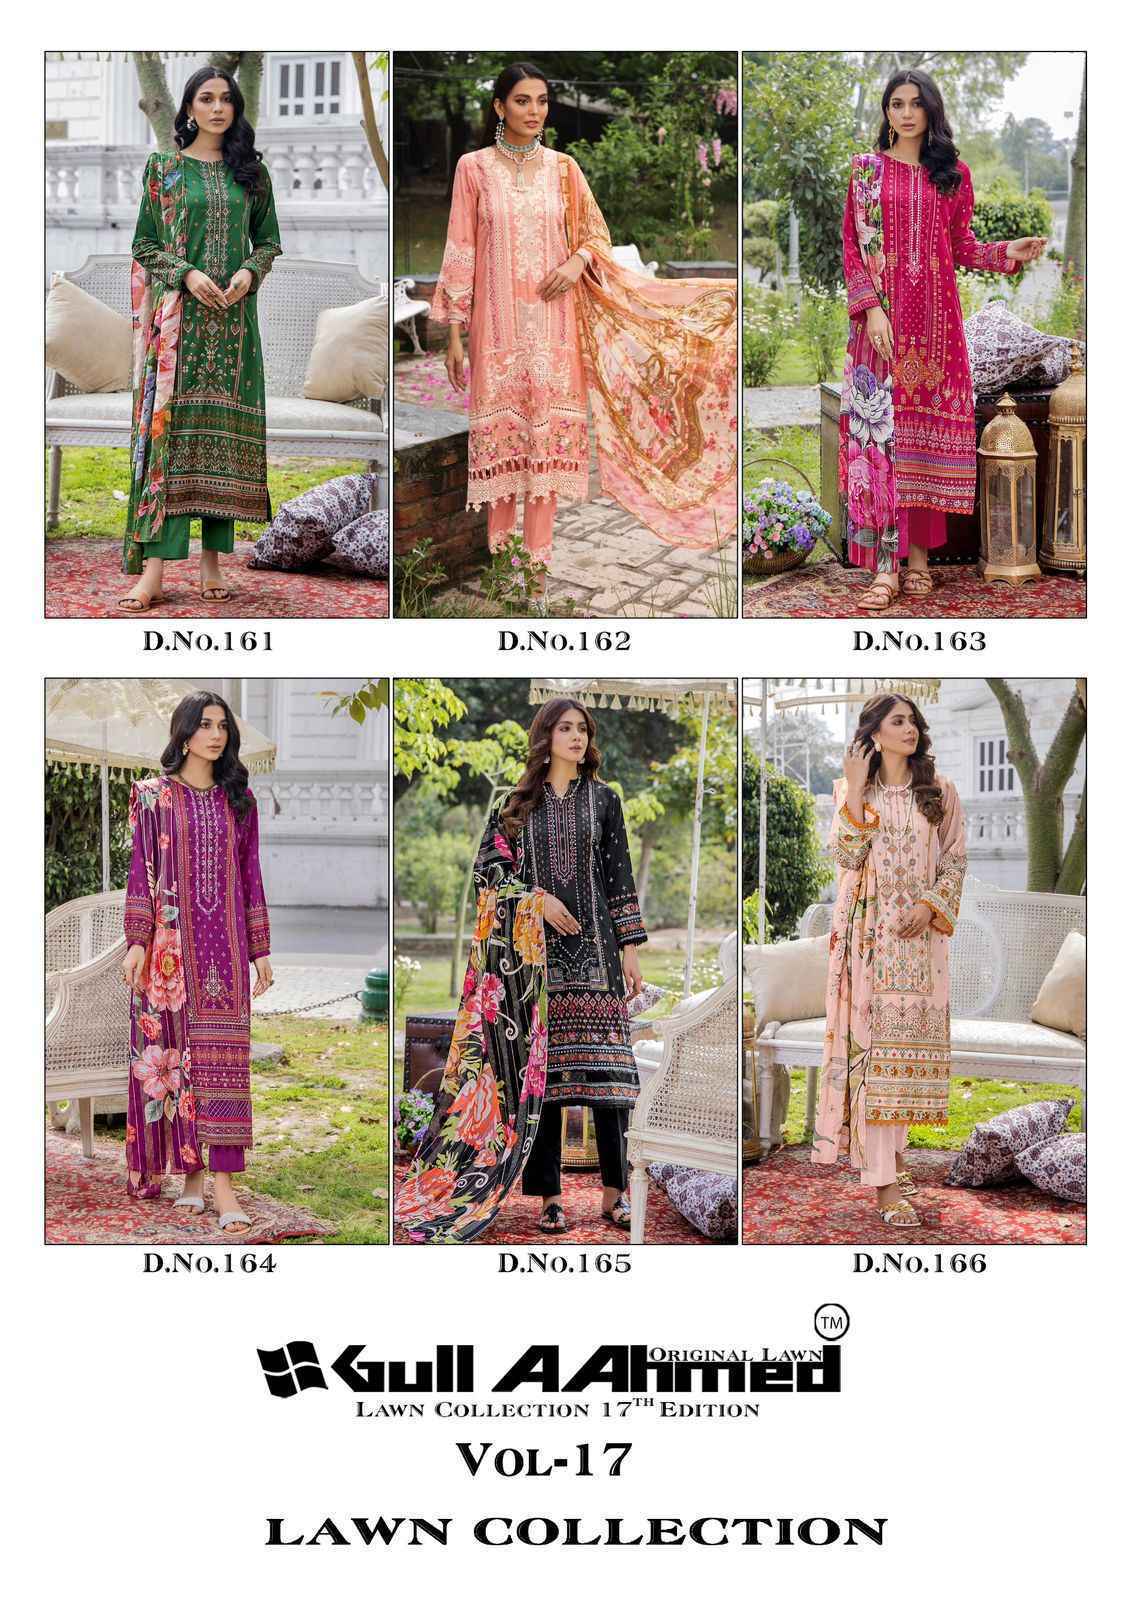 Gull Aahmed Lawn Collection Vol 17 Lawn Cotton Dress Material ( 6 pcs Set )